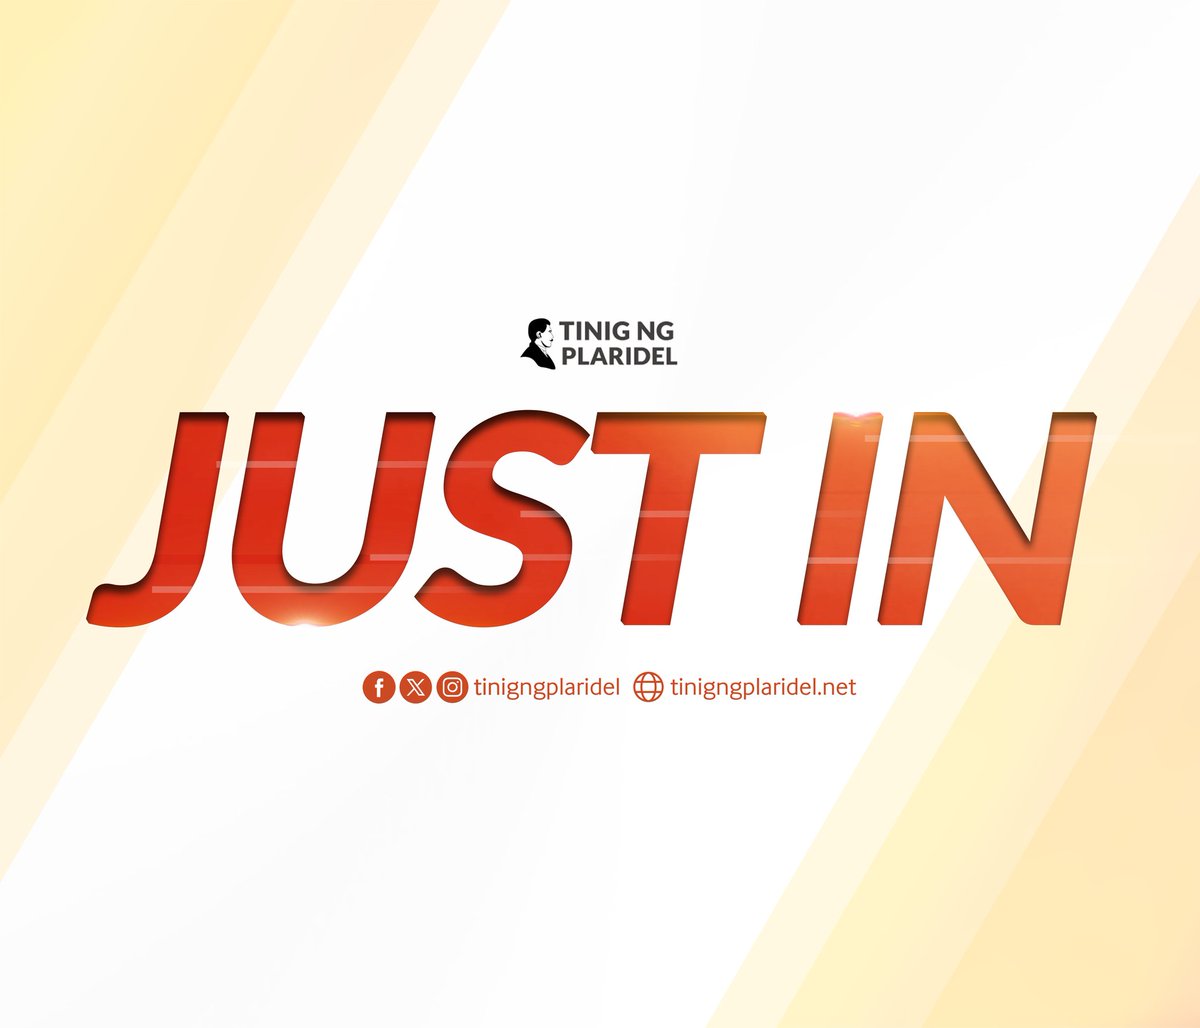 JUST IN: Quezon City Mayor Joy Belmonte confirms Vice Chancellor for Community Affairs Roehl Jamon has requested the clearing operations yesterday in Area 2 and other areas in UP Diliman through Brgy. UP Campus Captain Lawrence Mappala.